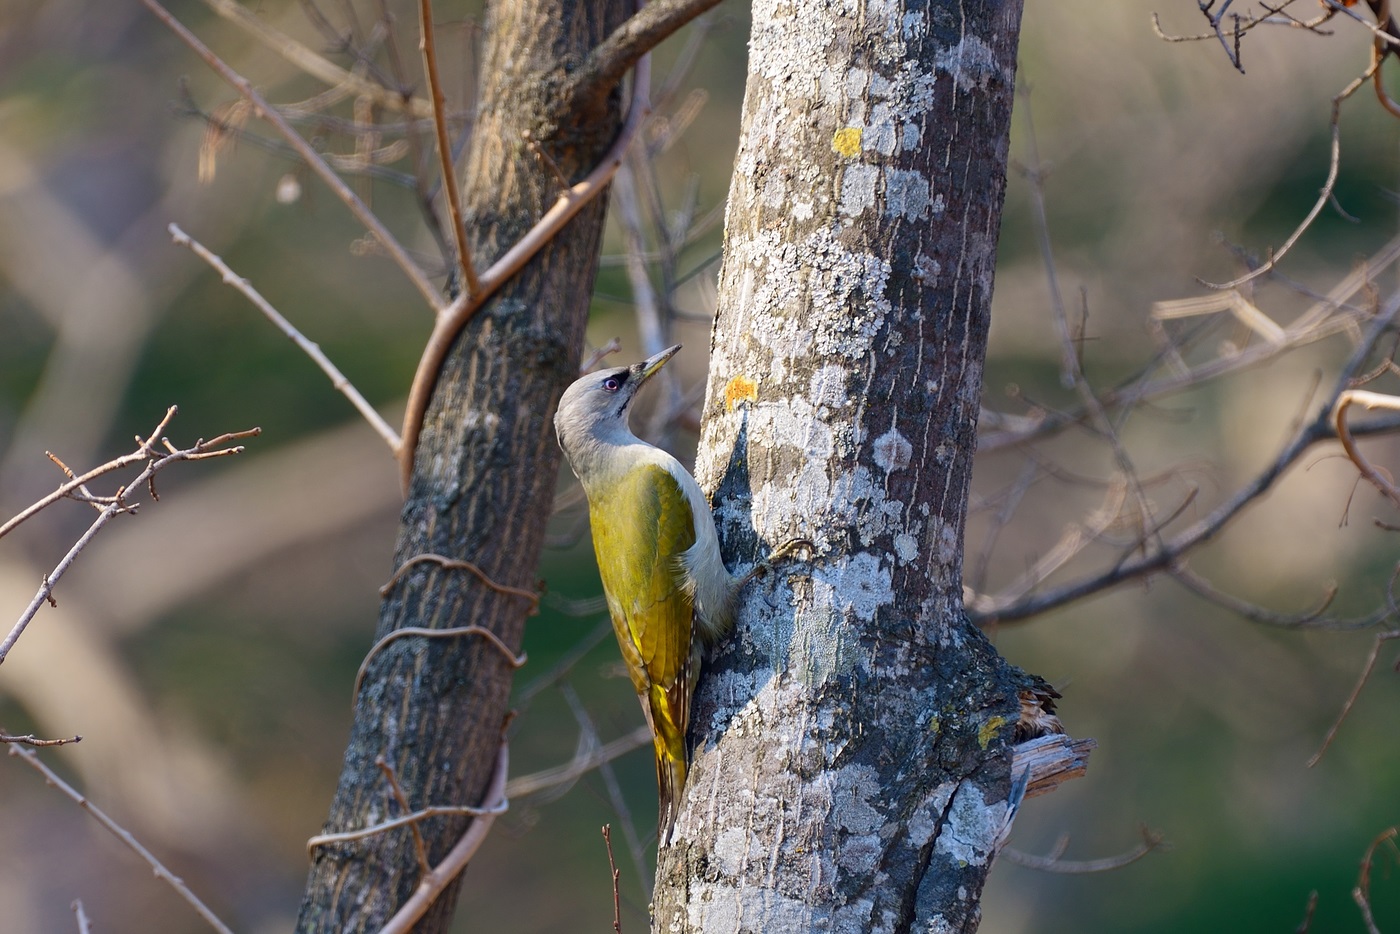 Gray-headed woodpecker searching for food